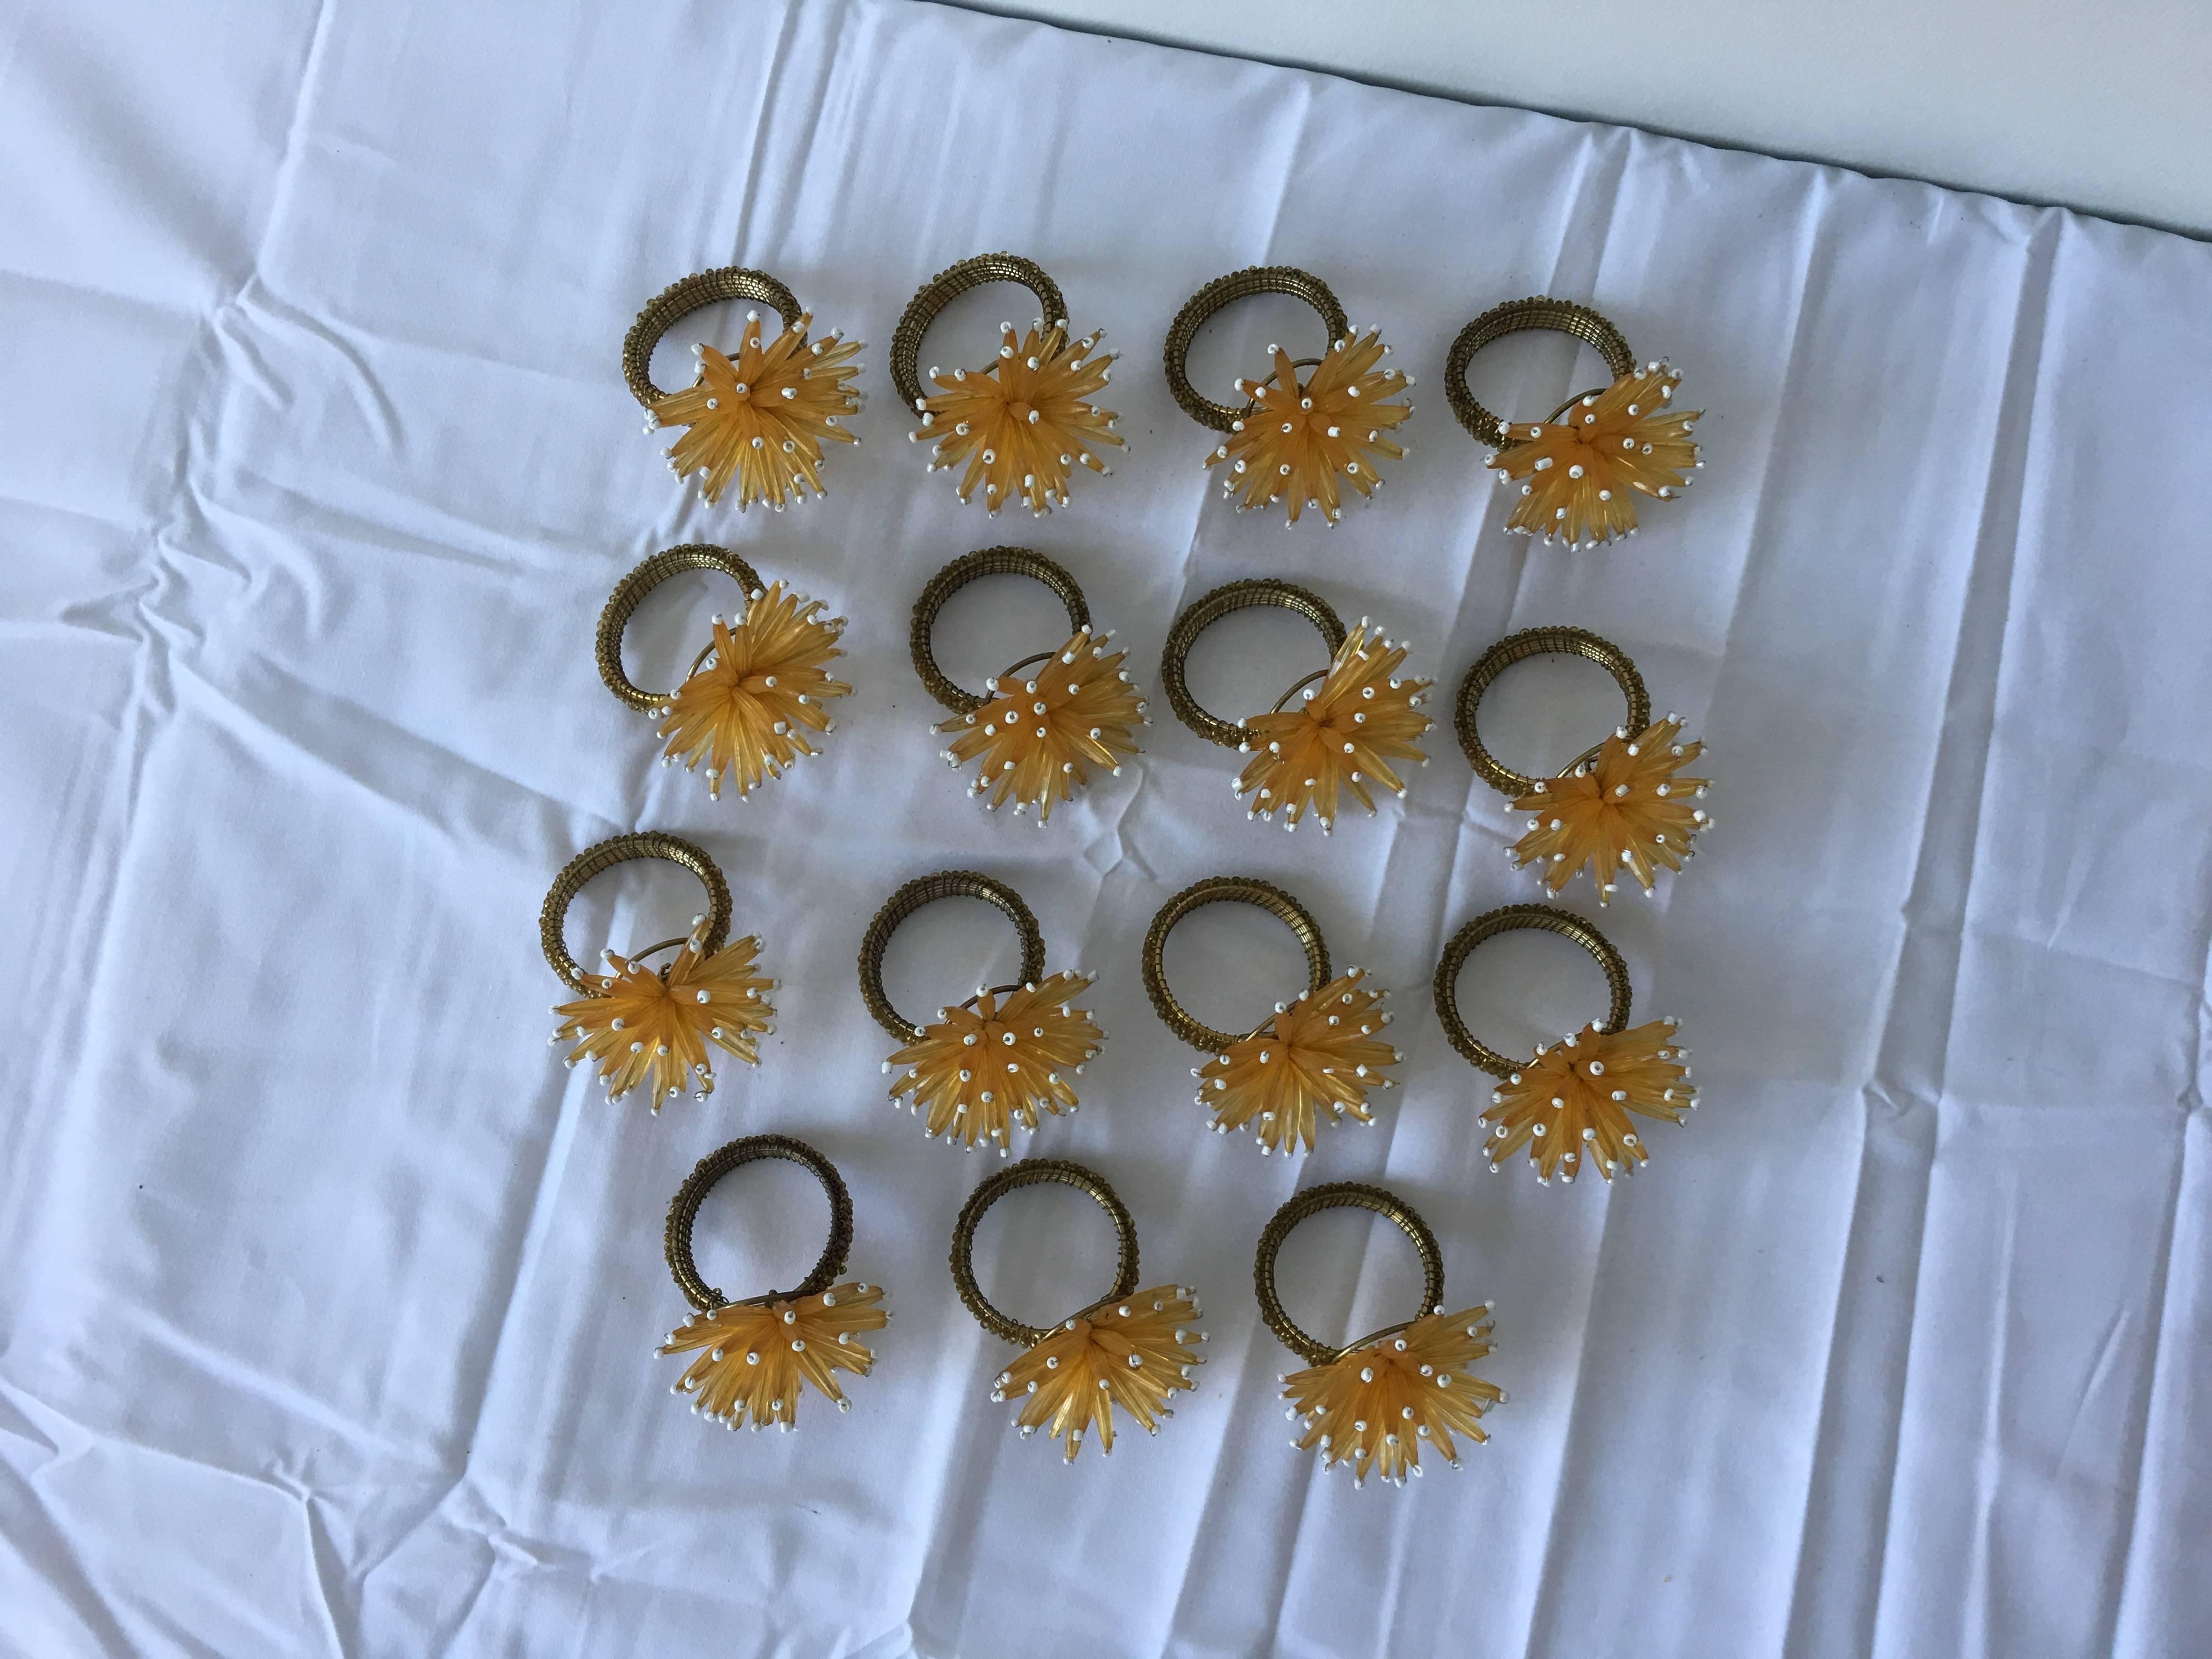 An immaculate set of 16, 1980s yellow and gold beaded starburst napkin rings.
  